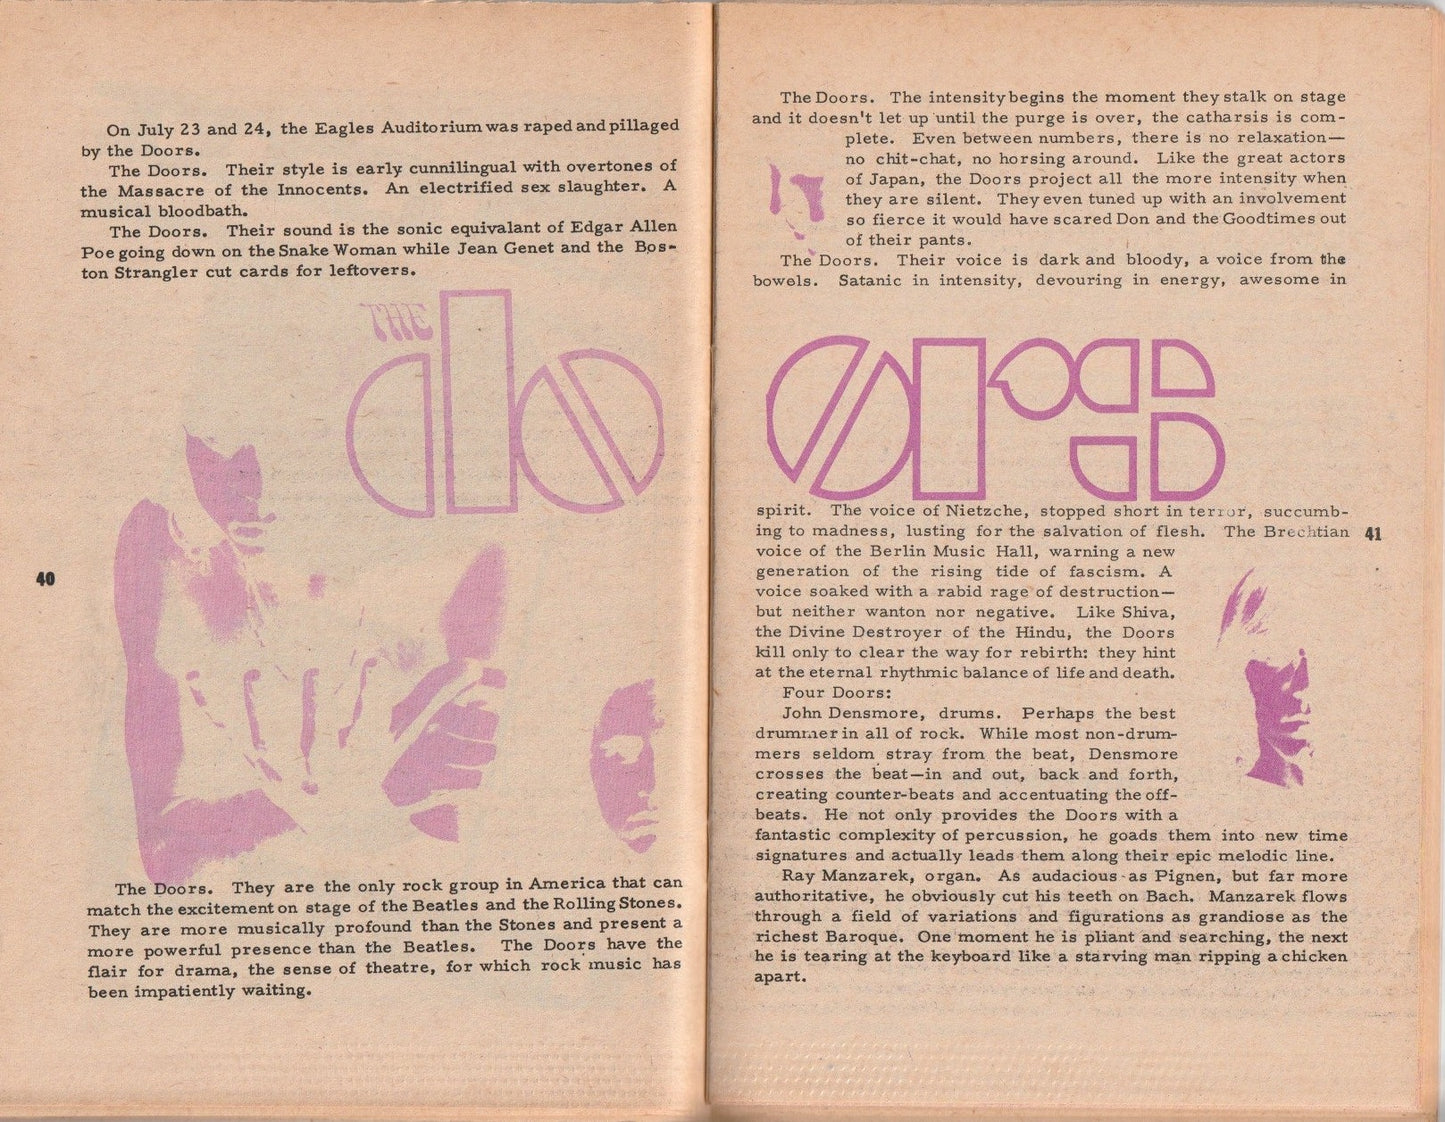 Underground Digest Vol. 1, No. 2 -- Notes of a Dirty Old Man Column by Charles Bukowski (1967)